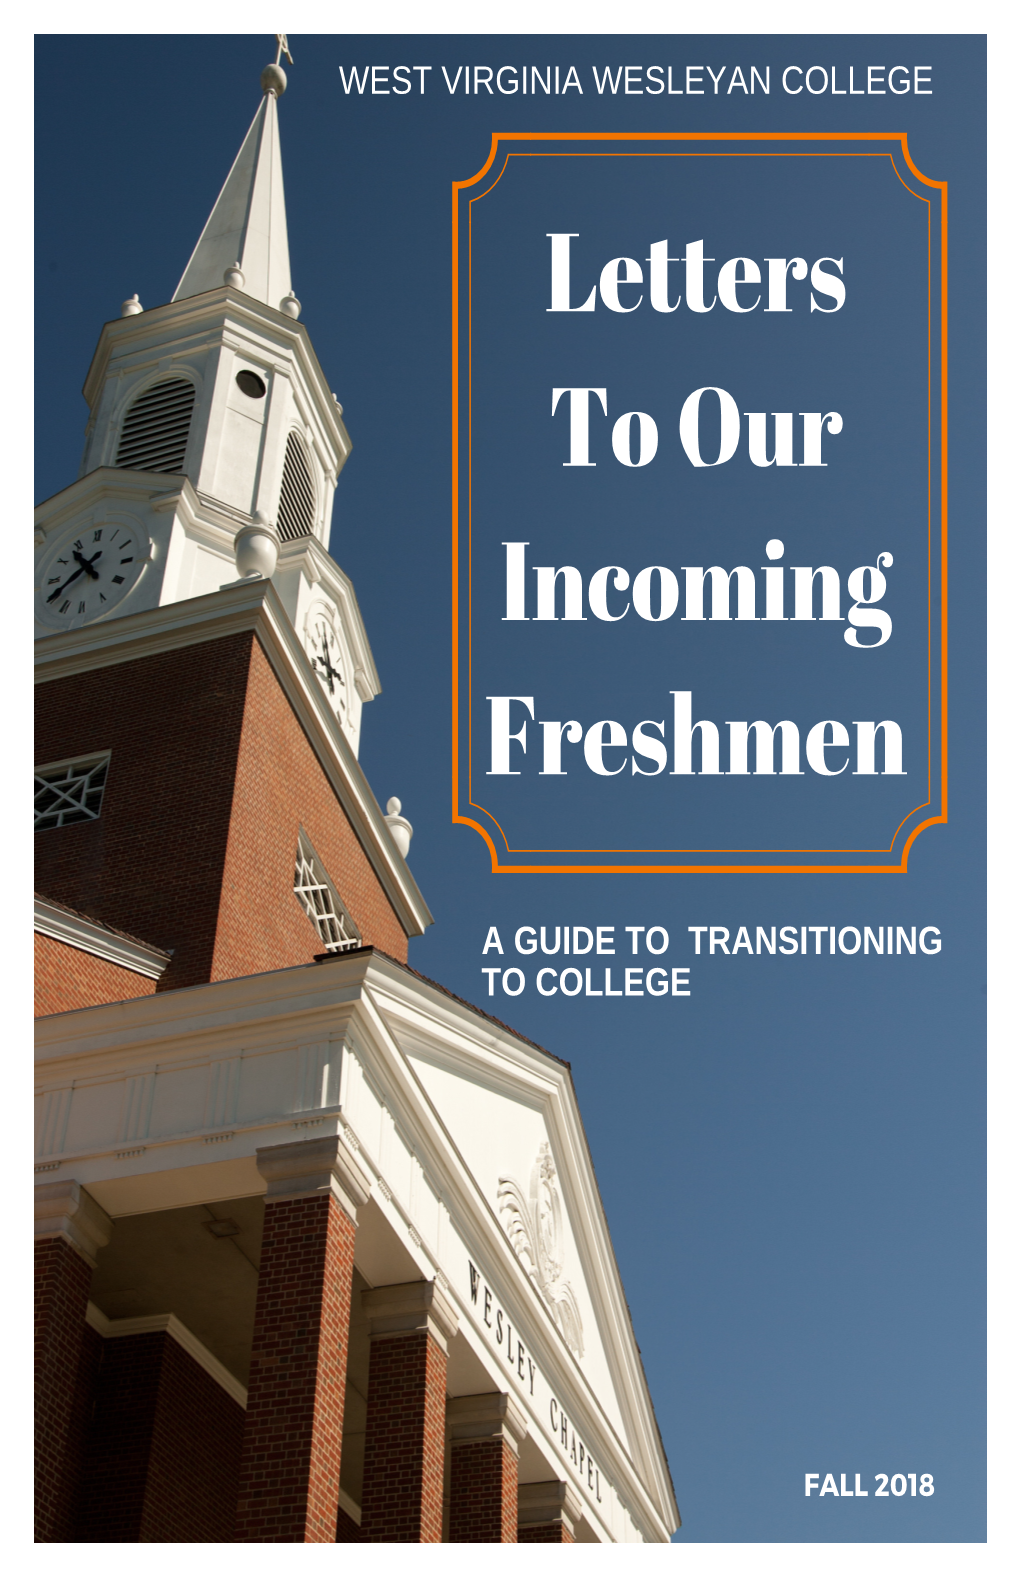 Letters to Our Incoming Freshmen